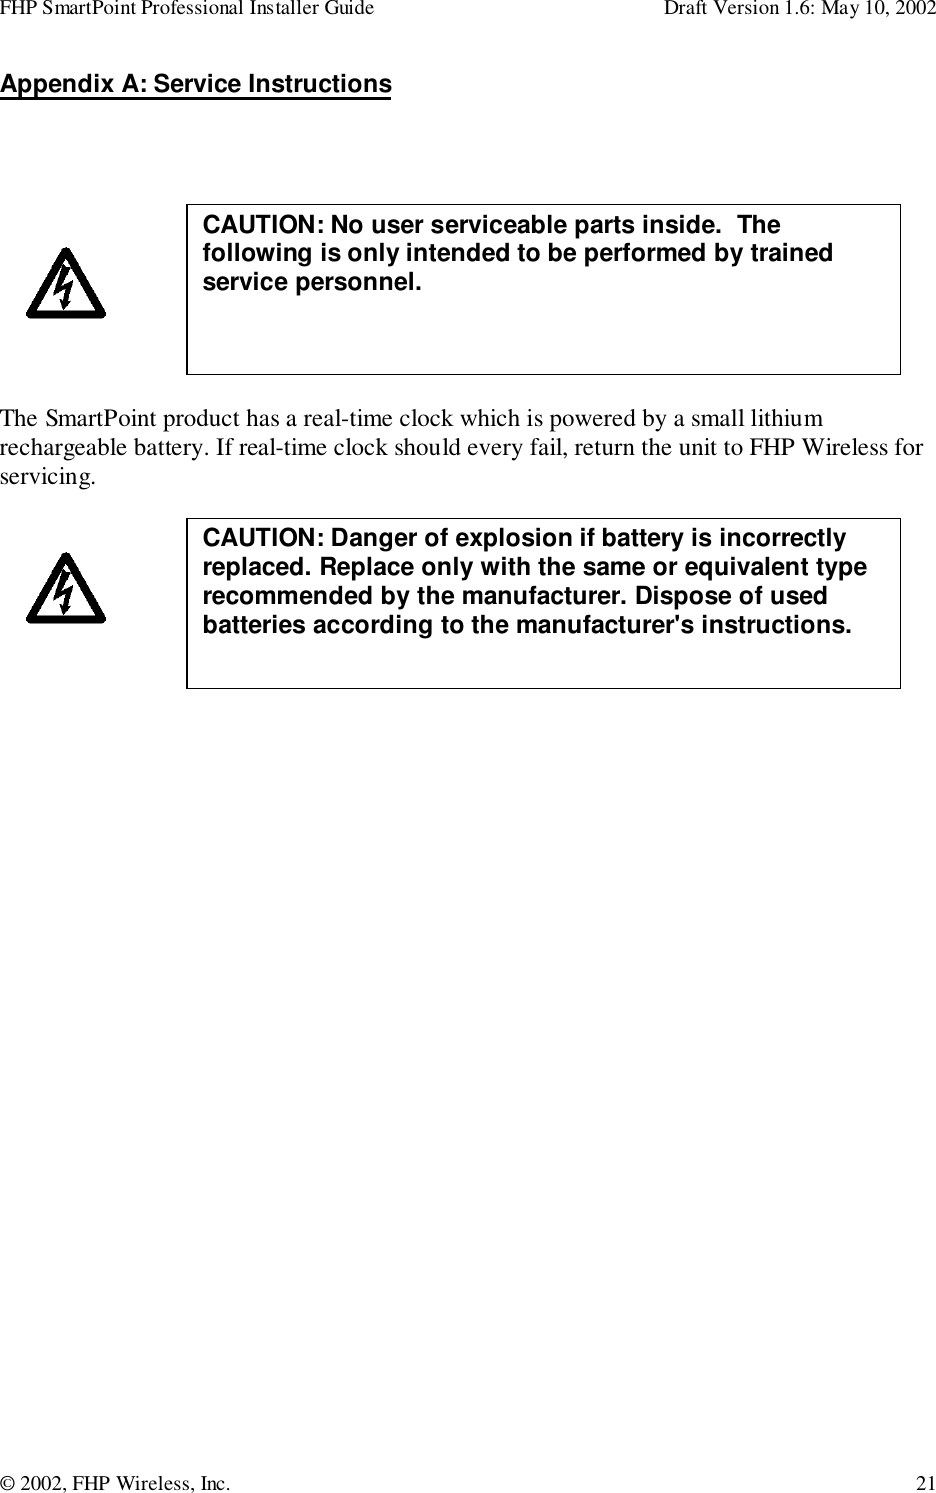 FHP SmartPoint Professional Installer Guide Draft Version 1.6: May 10, 2002© 2002, FHP Wireless, Inc. 21Appendix A: Service InstructionsThe SmartPoint product has a real-time clock which is powered by a small lithiumrechargeable battery. If real-time clock should every fail, return the unit to FHP Wireless forservicing. CAUTION: Danger of explosion if battery is incorrectlyreplaced. Replace only with the same or equivalent typerecommended by the manufacturer. Dispose of usedbatteries according to the manufacturer&apos;s instructions.CAUTION: No user serviceable parts inside.  Thefollowing is only intended to be performed by trainedservice personnel.